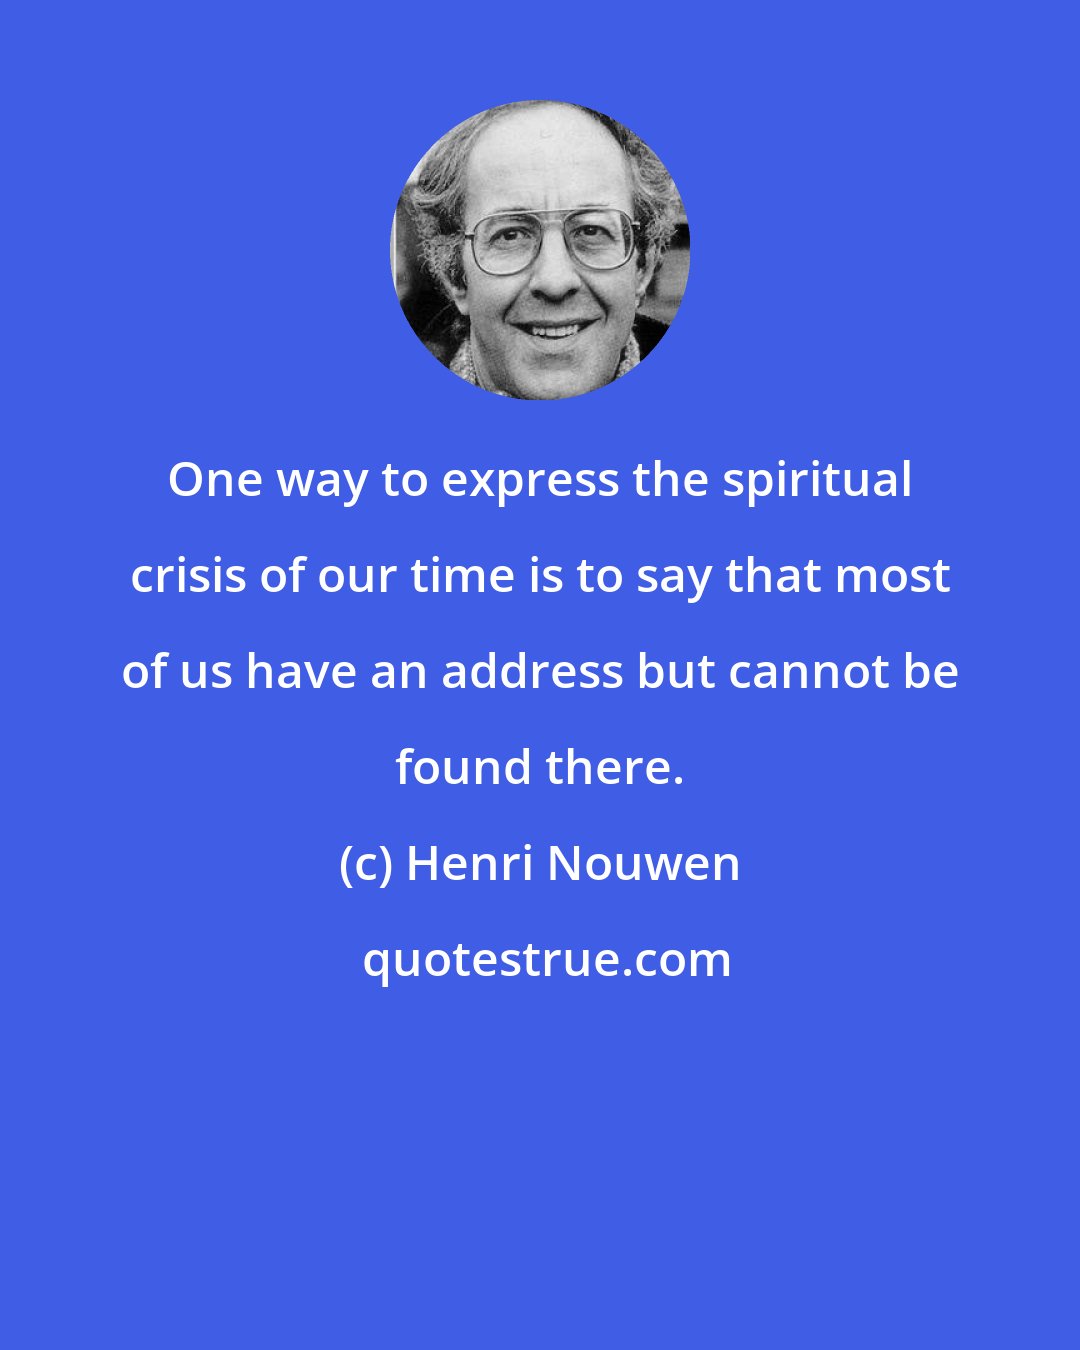 Henri Nouwen: One way to express the spiritual crisis of our time is to say that most of us have an address but cannot be found there.